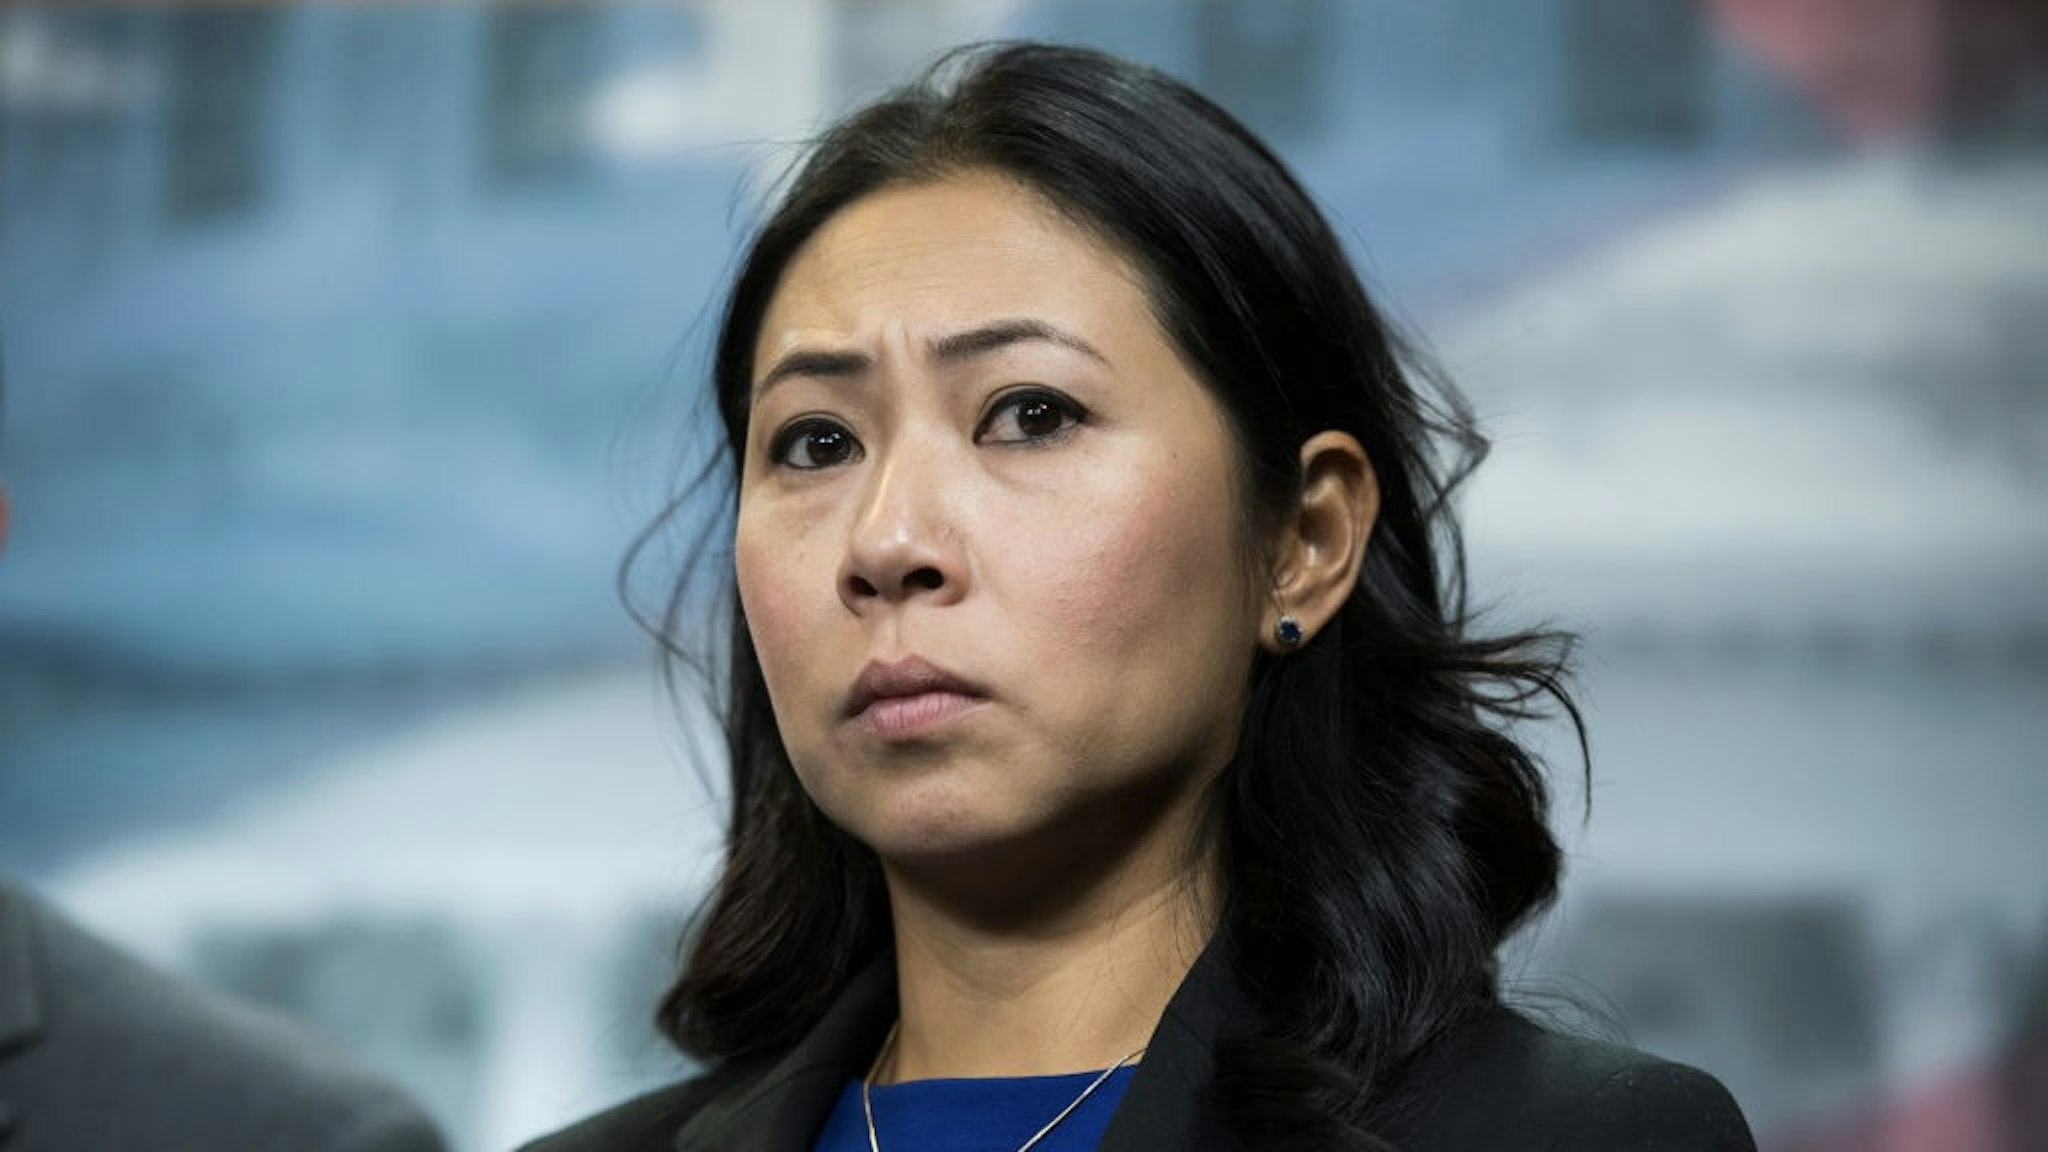 UNITED STATES - SEPTEMBER 20: Rep. Stephanie Murphy, D-Fla., conducts a news conference in the Capitol Visitor Center on the eviction of Congressional offices from Veterans Affairs Department facilities on Friday, September 20, 2019. (Photo By Tom Williams/CQ Roll Call)